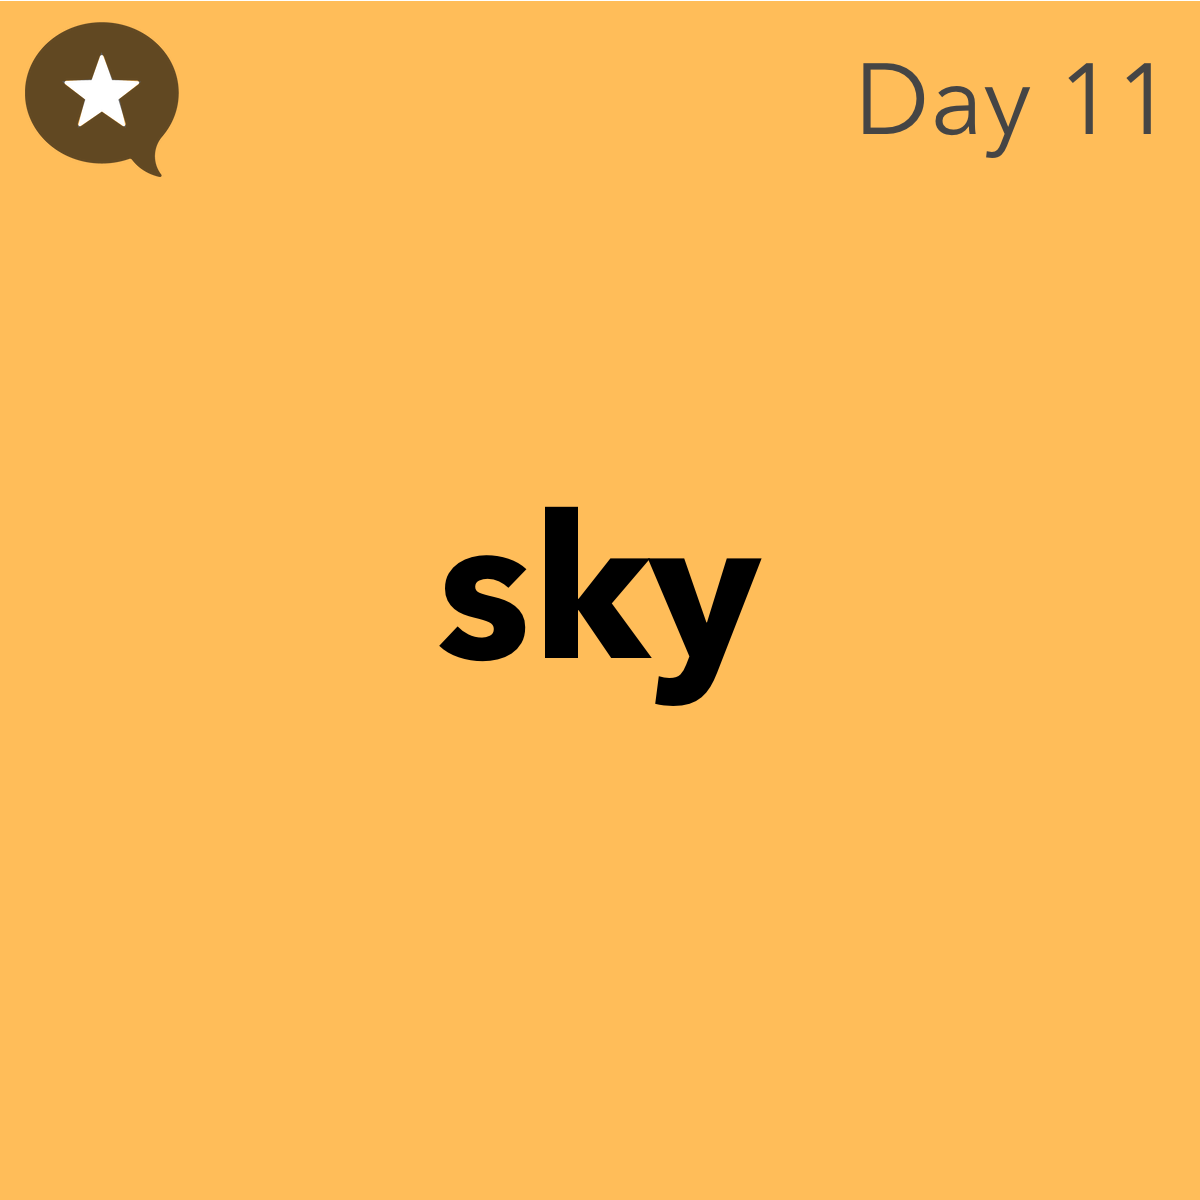 Day 11 sky graphic